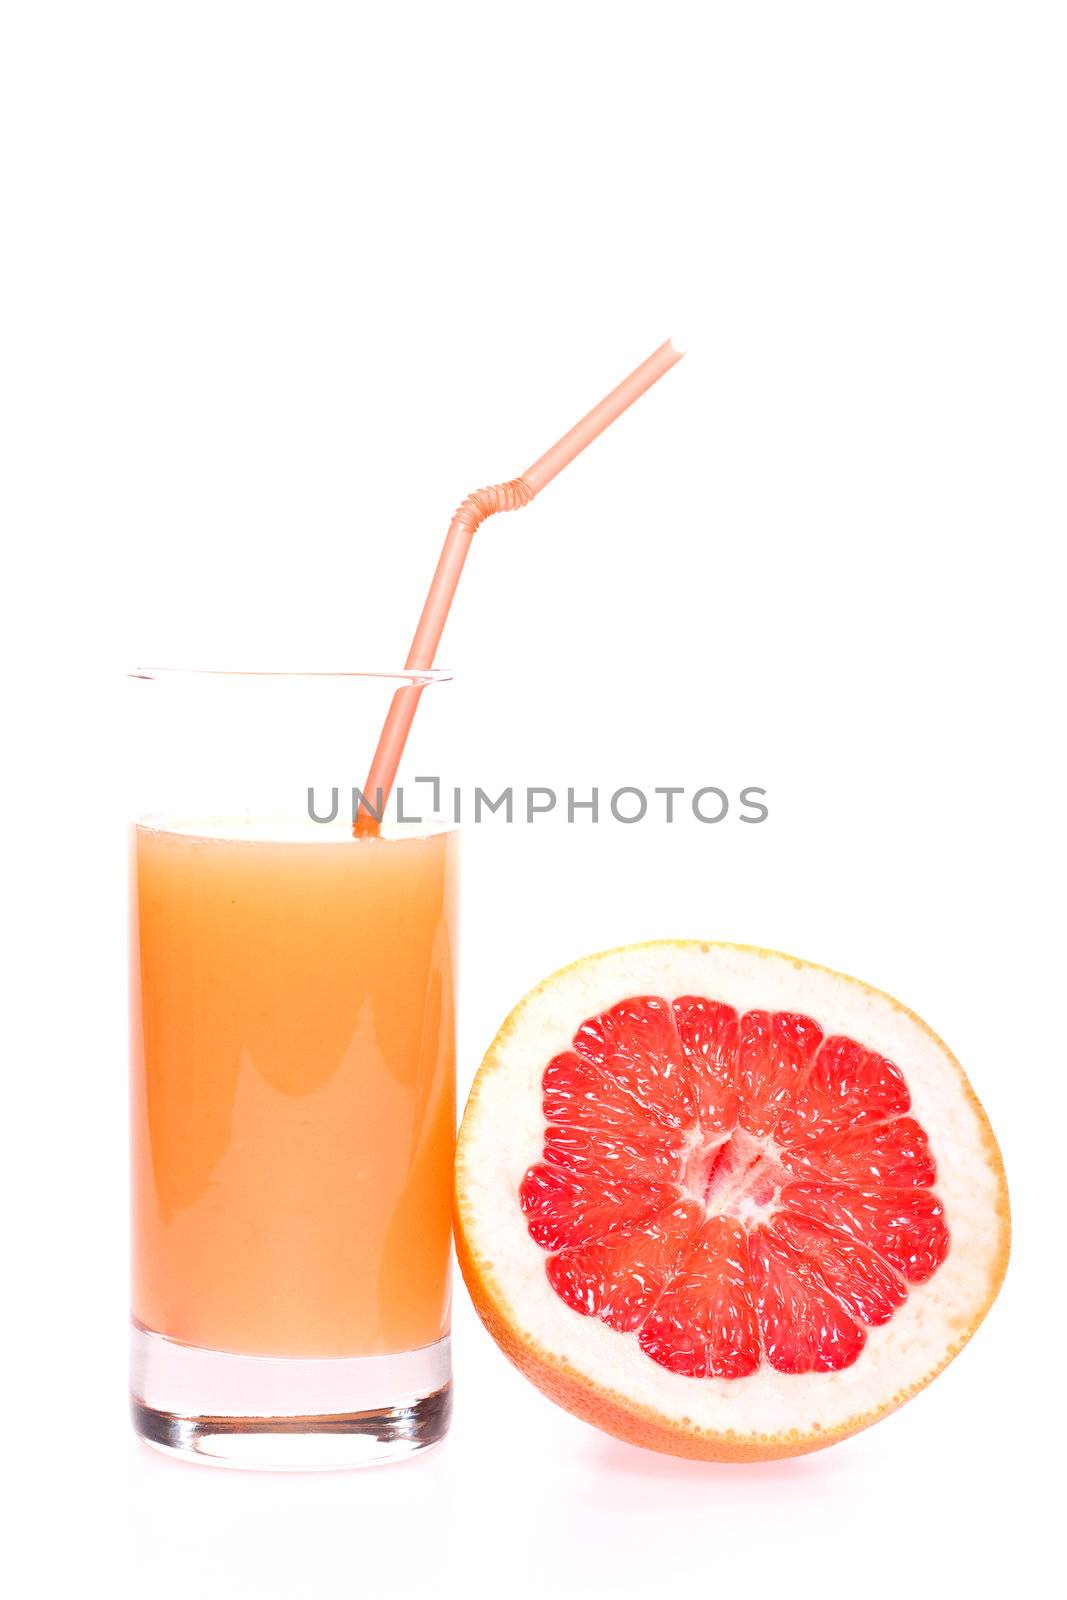 grapefruit and juice in glass on a white background